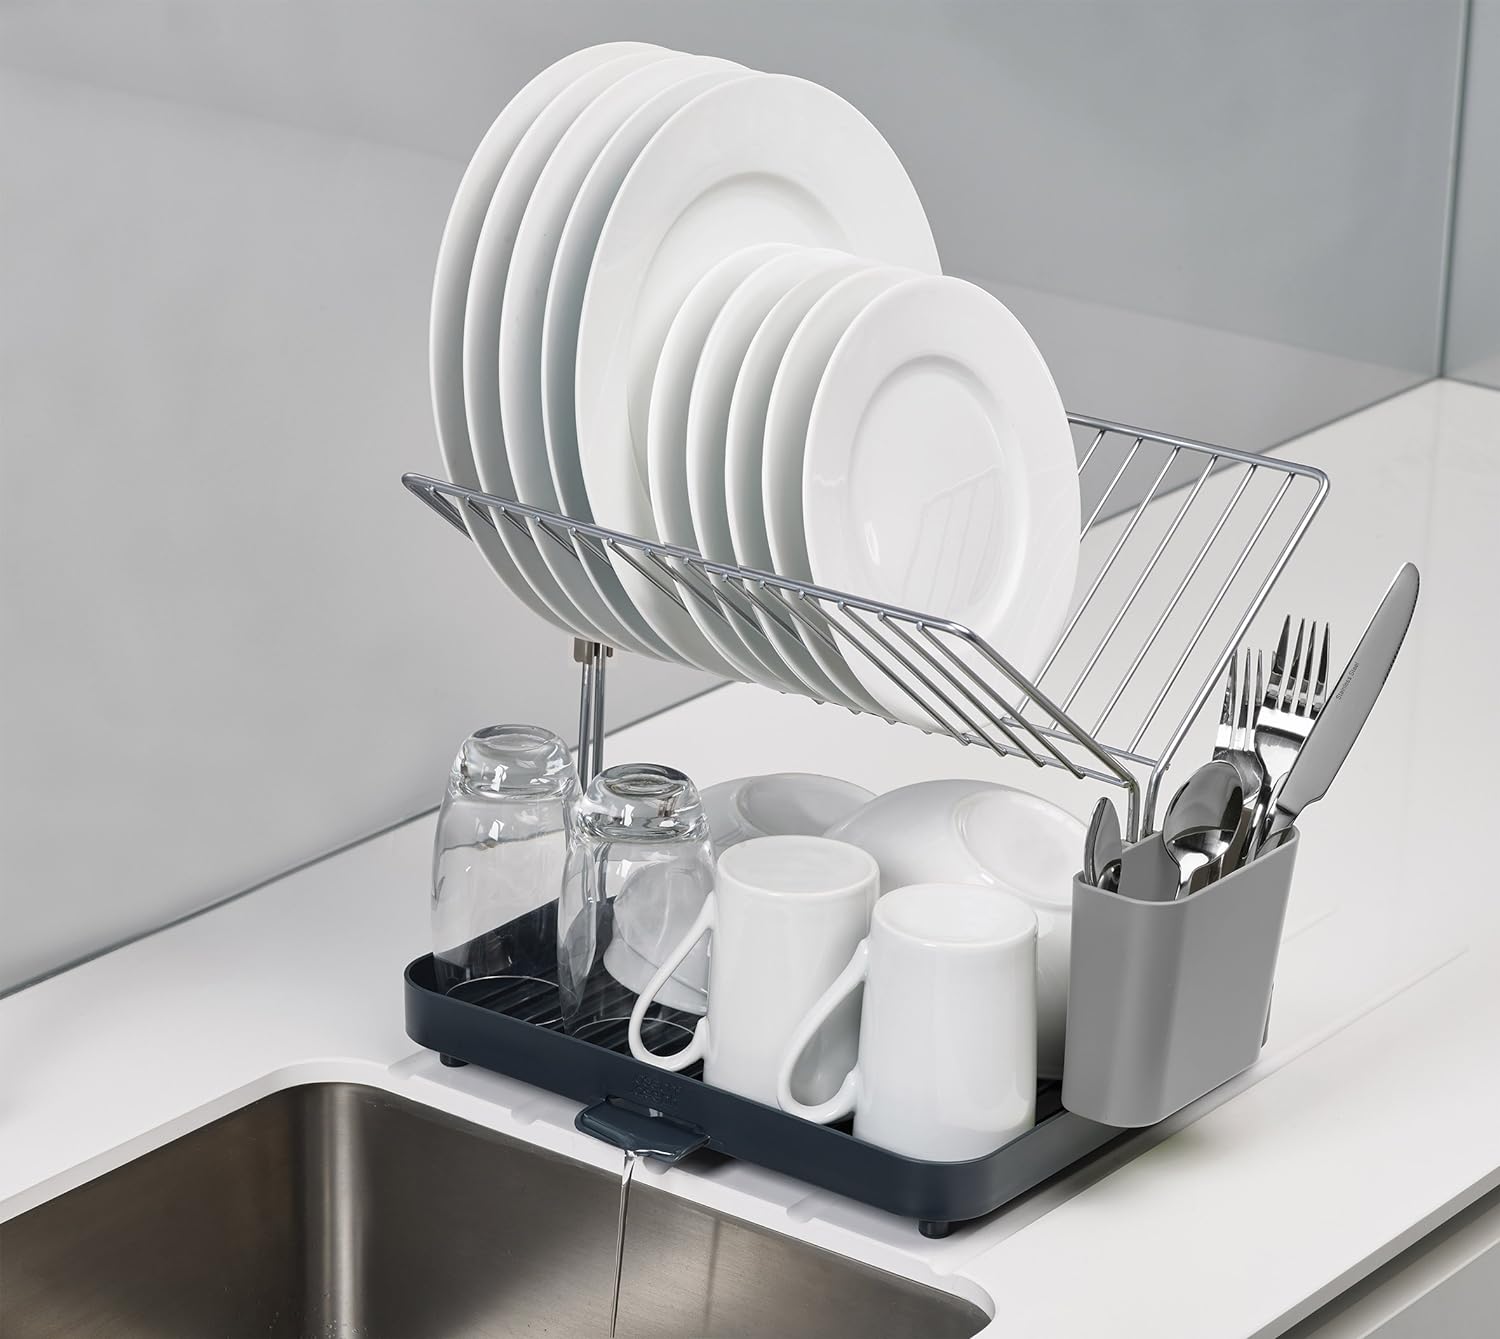 Joseph Joseph Y-Rack Dish Rack and Drain Board Set with Cutlery Organizer Drainer  Drying Tray, Large, Gray